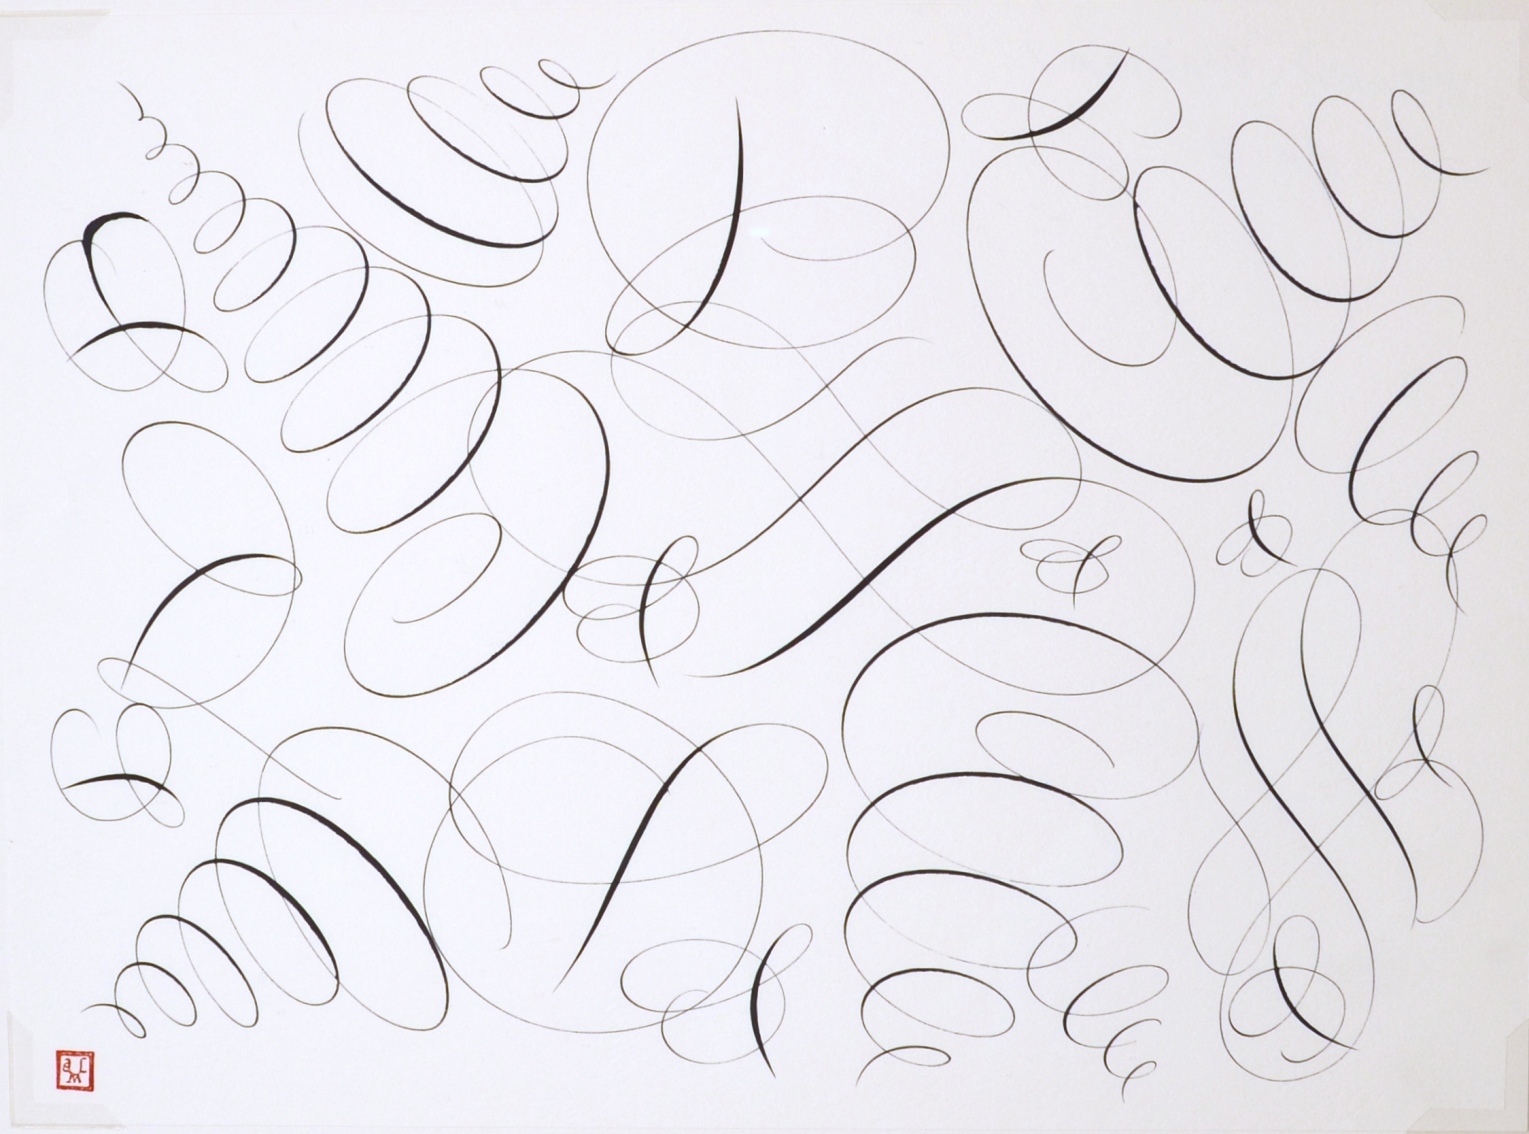 "Calligraphic Drawing #2"